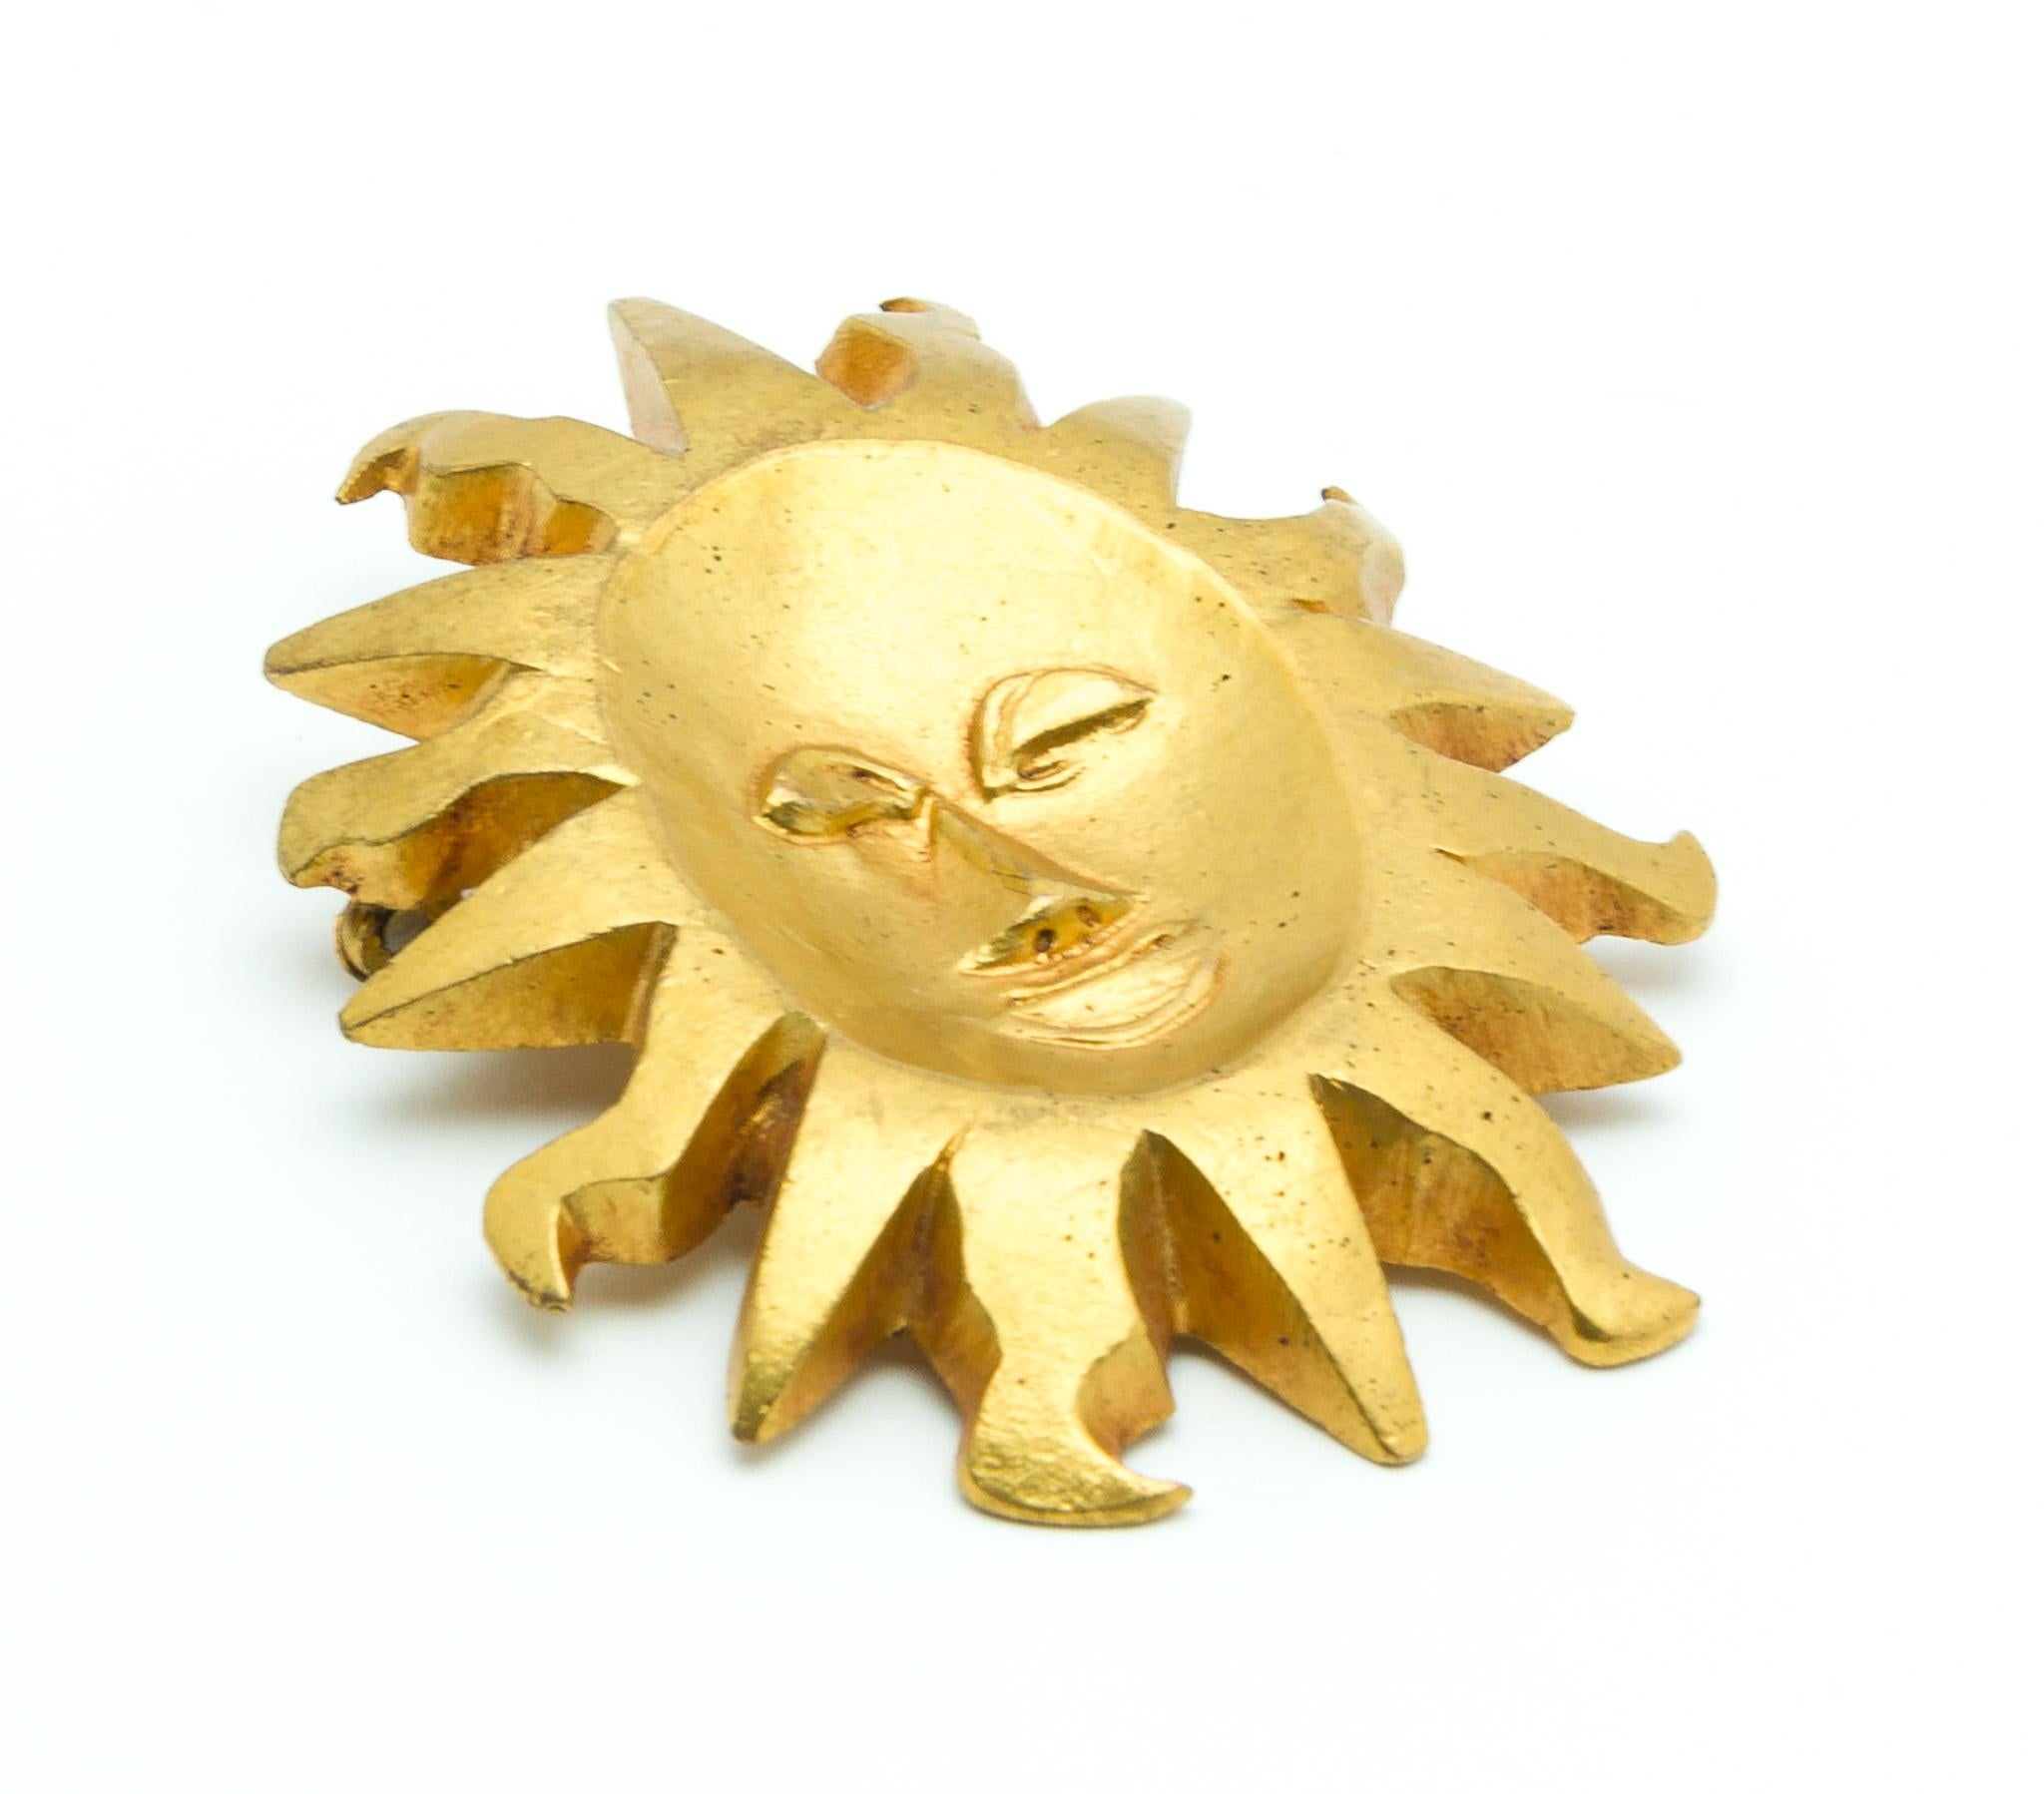 Gorgeous Line Vautrin Mask Sun Vintage Brooch, circa 1950, gold plated bronze.

Size: 6 x 4.5 cm

Marked: LV

Very good vintage condition. Pictures are included in the description. 